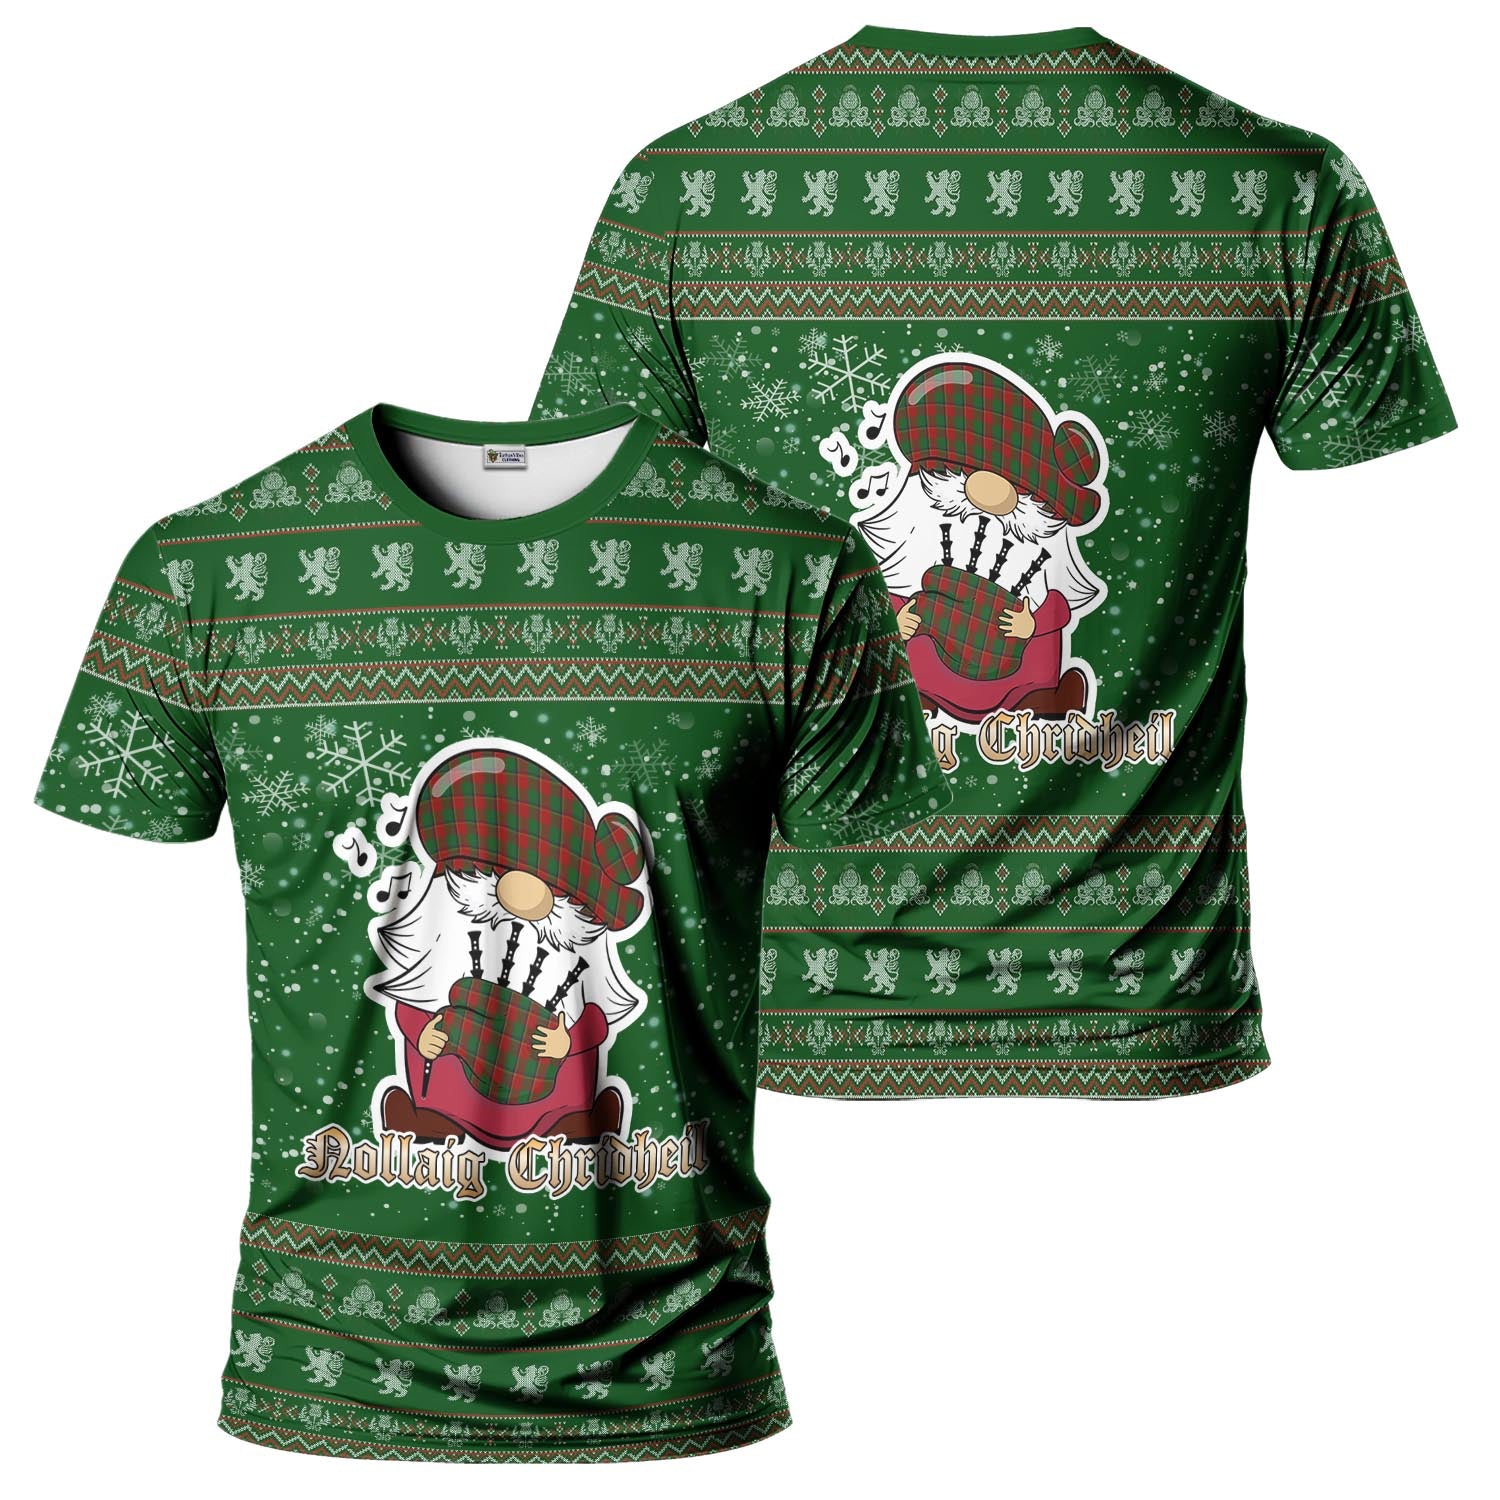 Turnbull Dress Clan Christmas Family T-Shirt with Funny Gnome Playing Bagpipes Men's Shirt Green - Tartanvibesclothing